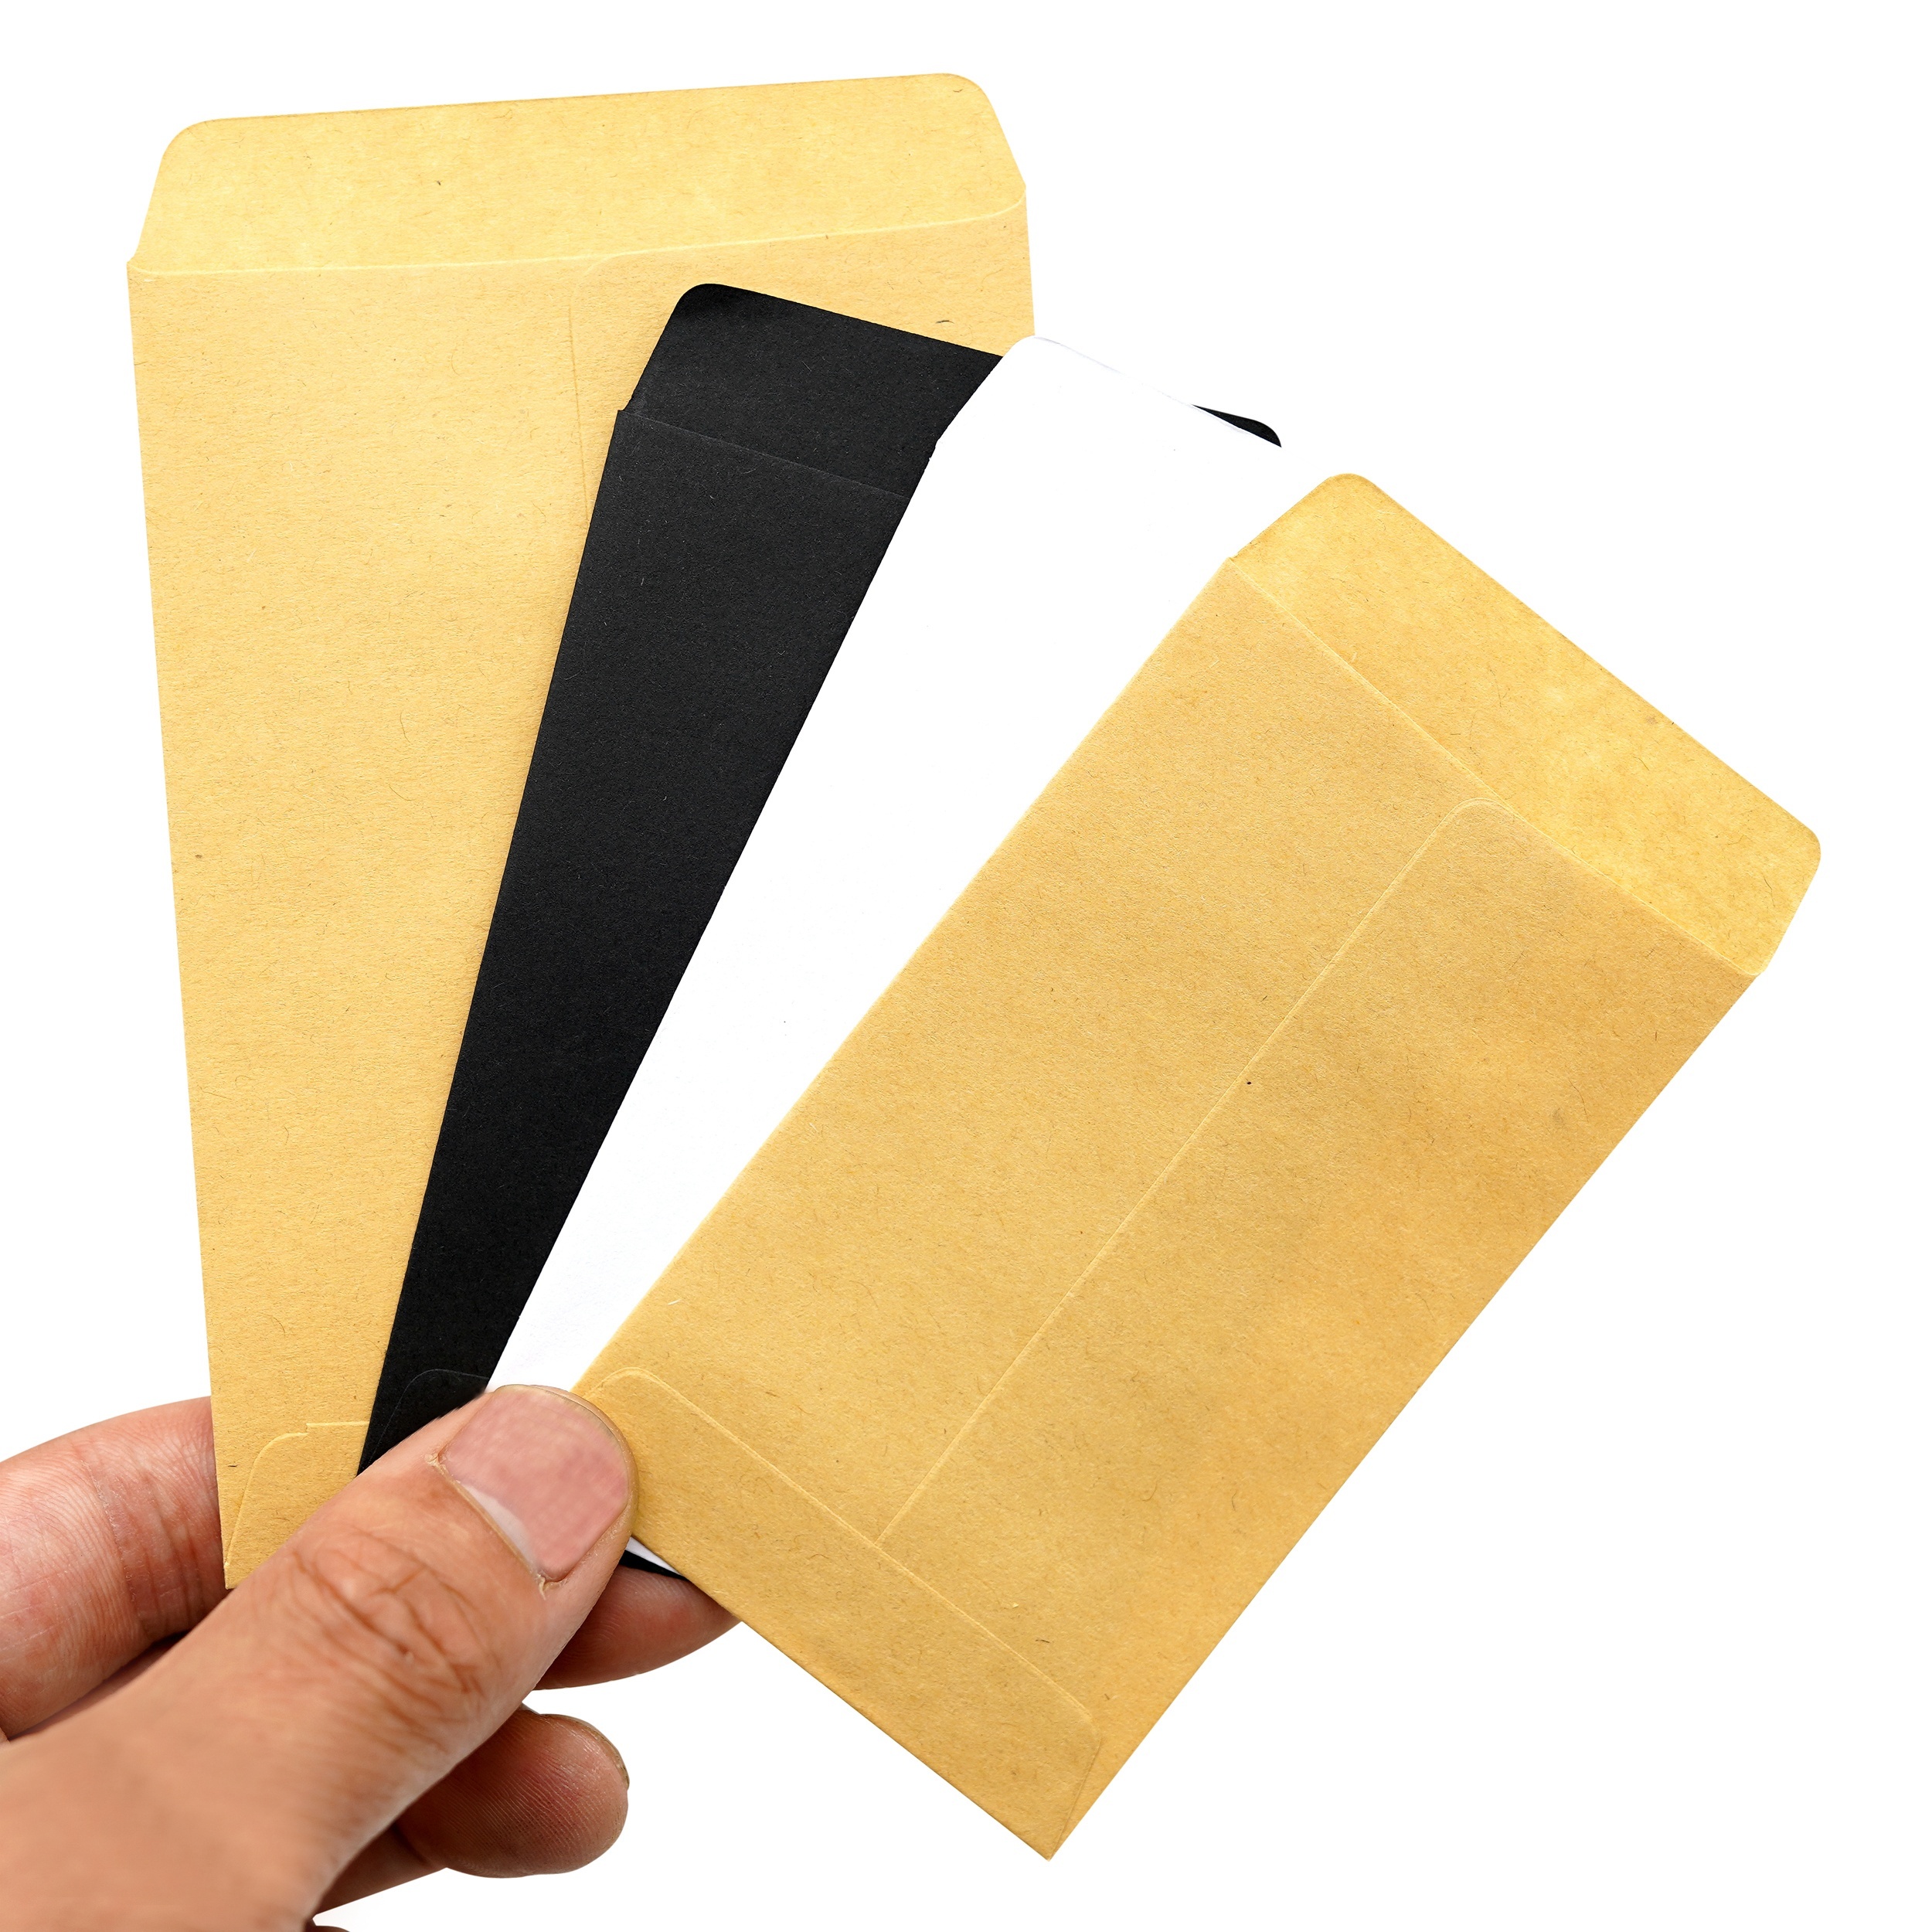 

50pcs Kraft Paper Bag Mini Envelope Gift Bags Candy Bags Snack Cookie Bags Baking Package Supplies Gift Wrap Bags